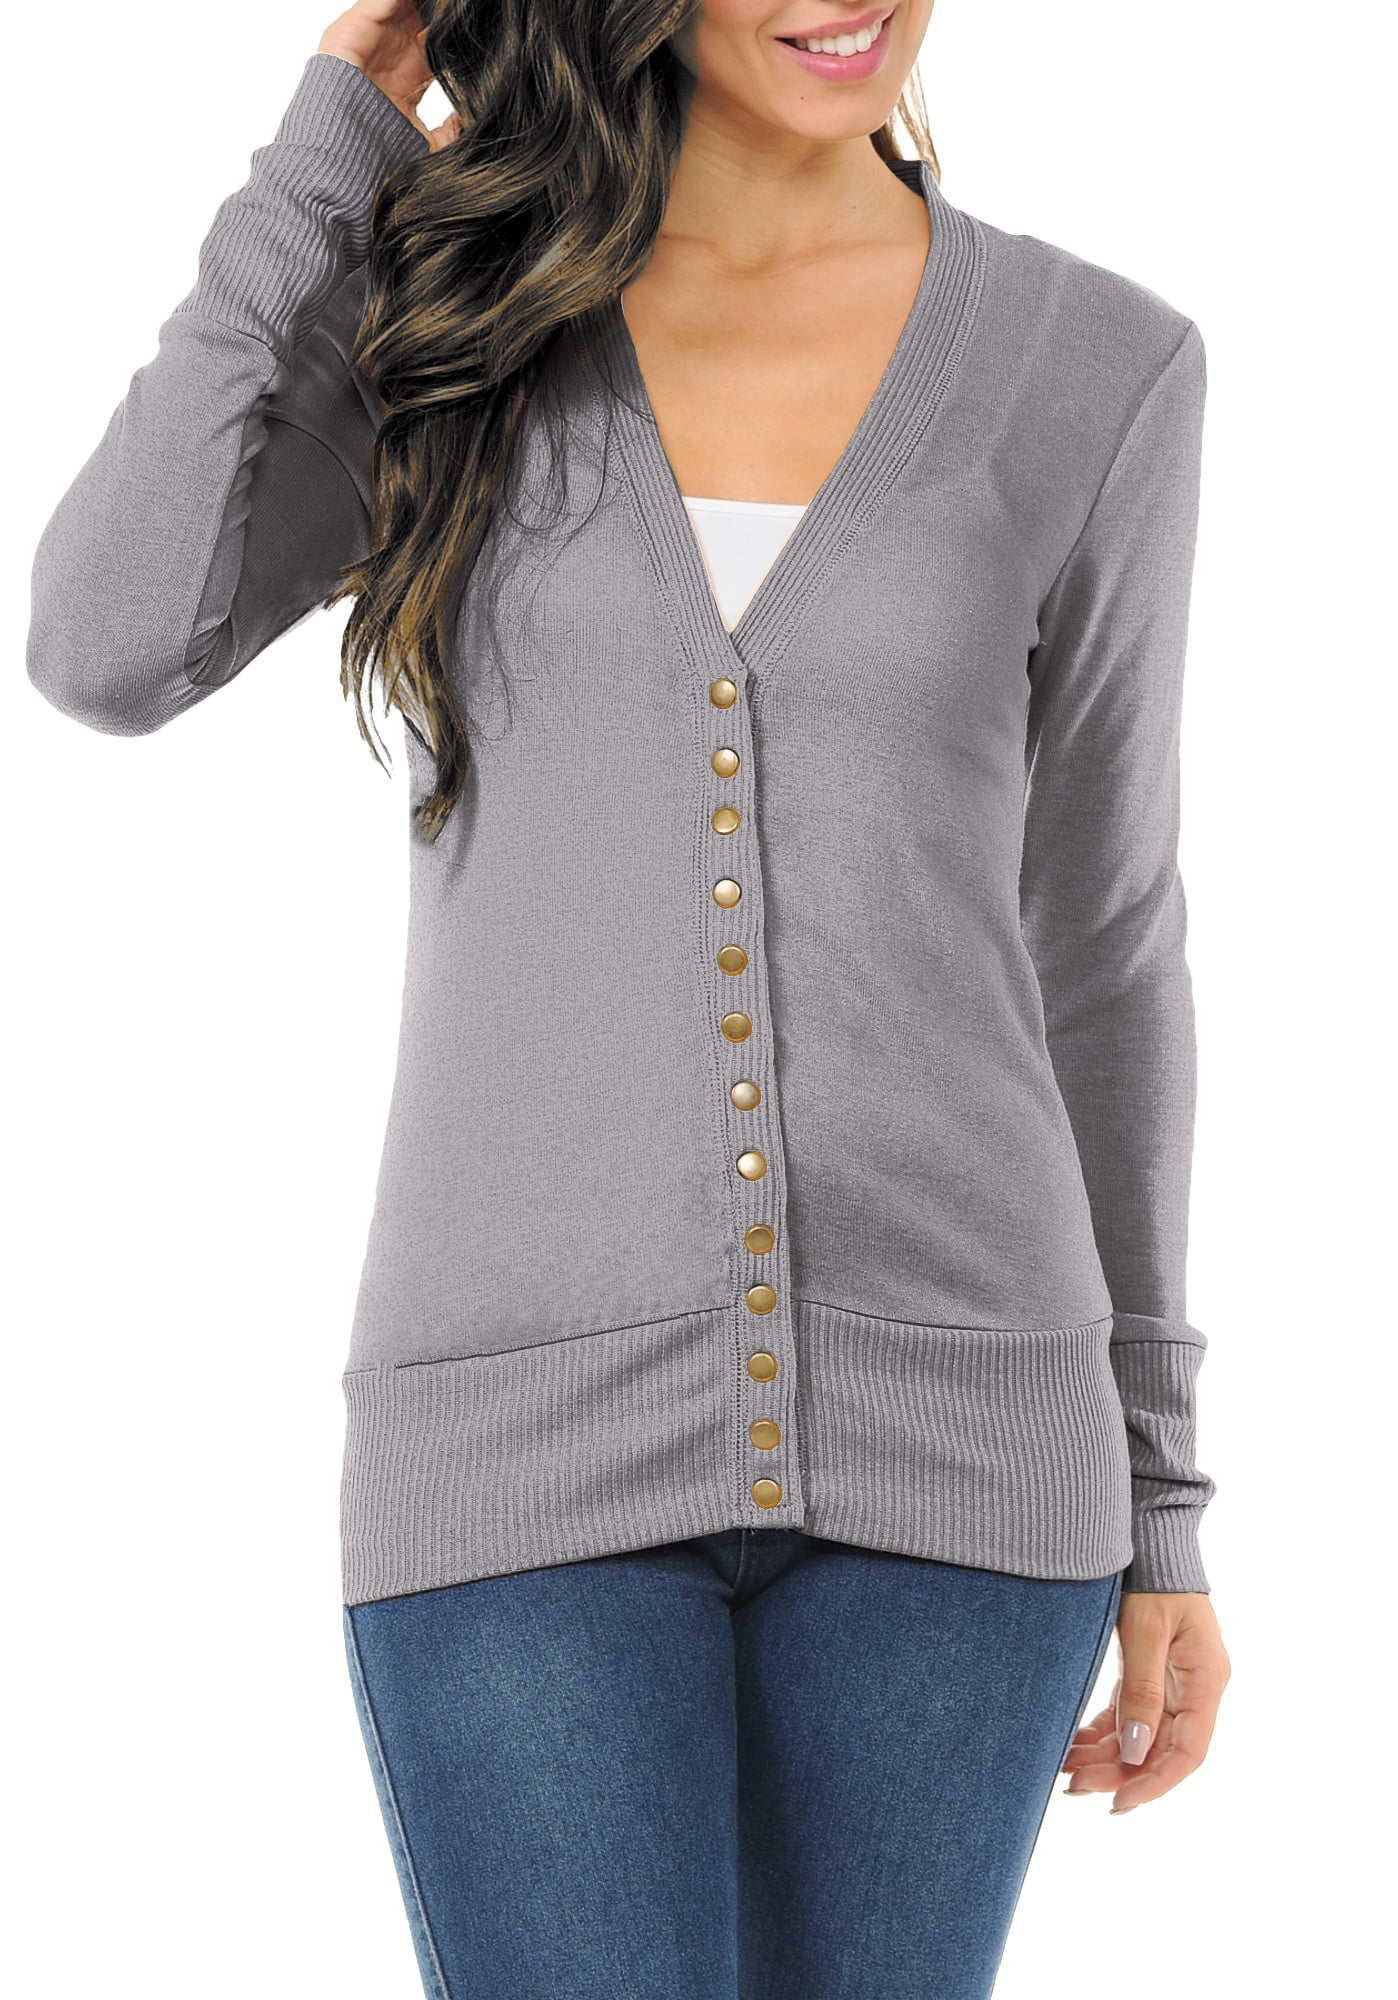 ClothingAve. Women's Long Sleeve Snap Button Sweater Cardigan w/ Ribbed ...